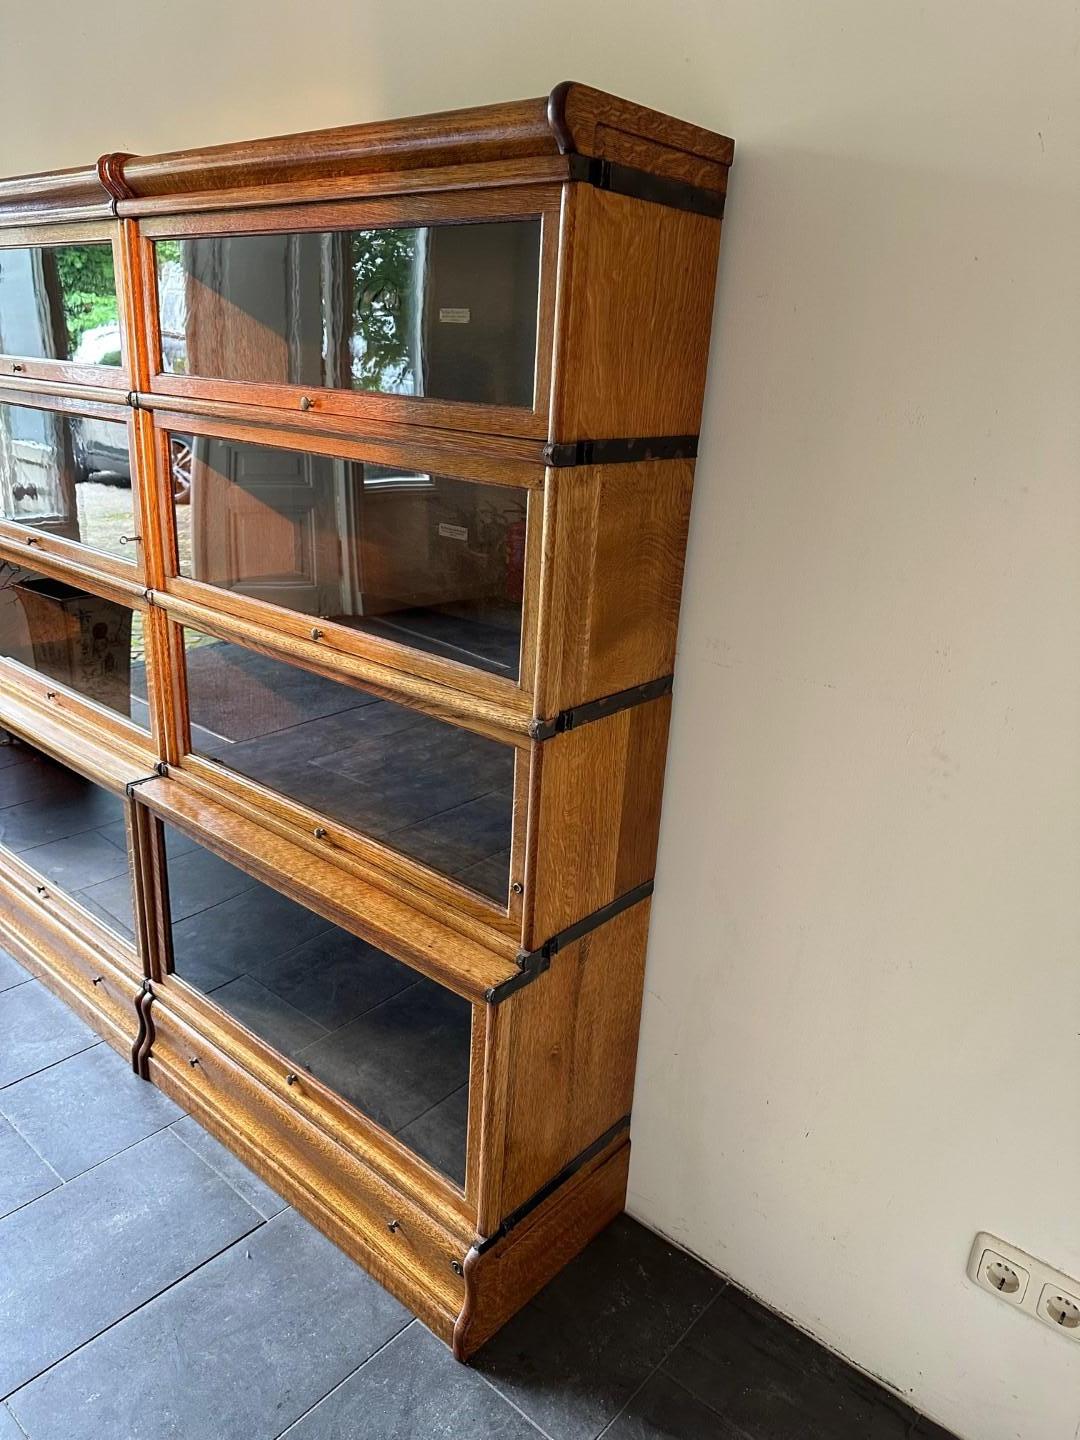 Antique oak Globe Wernicke bookcase in perfect condition. the cabinet consists of 8 stackable parts with the lower parts being deeper and higher. There are also drawers in the plinths.
Origin: England
Period: Approx. 1900
Size: 173cm x 35cm x H.158cm